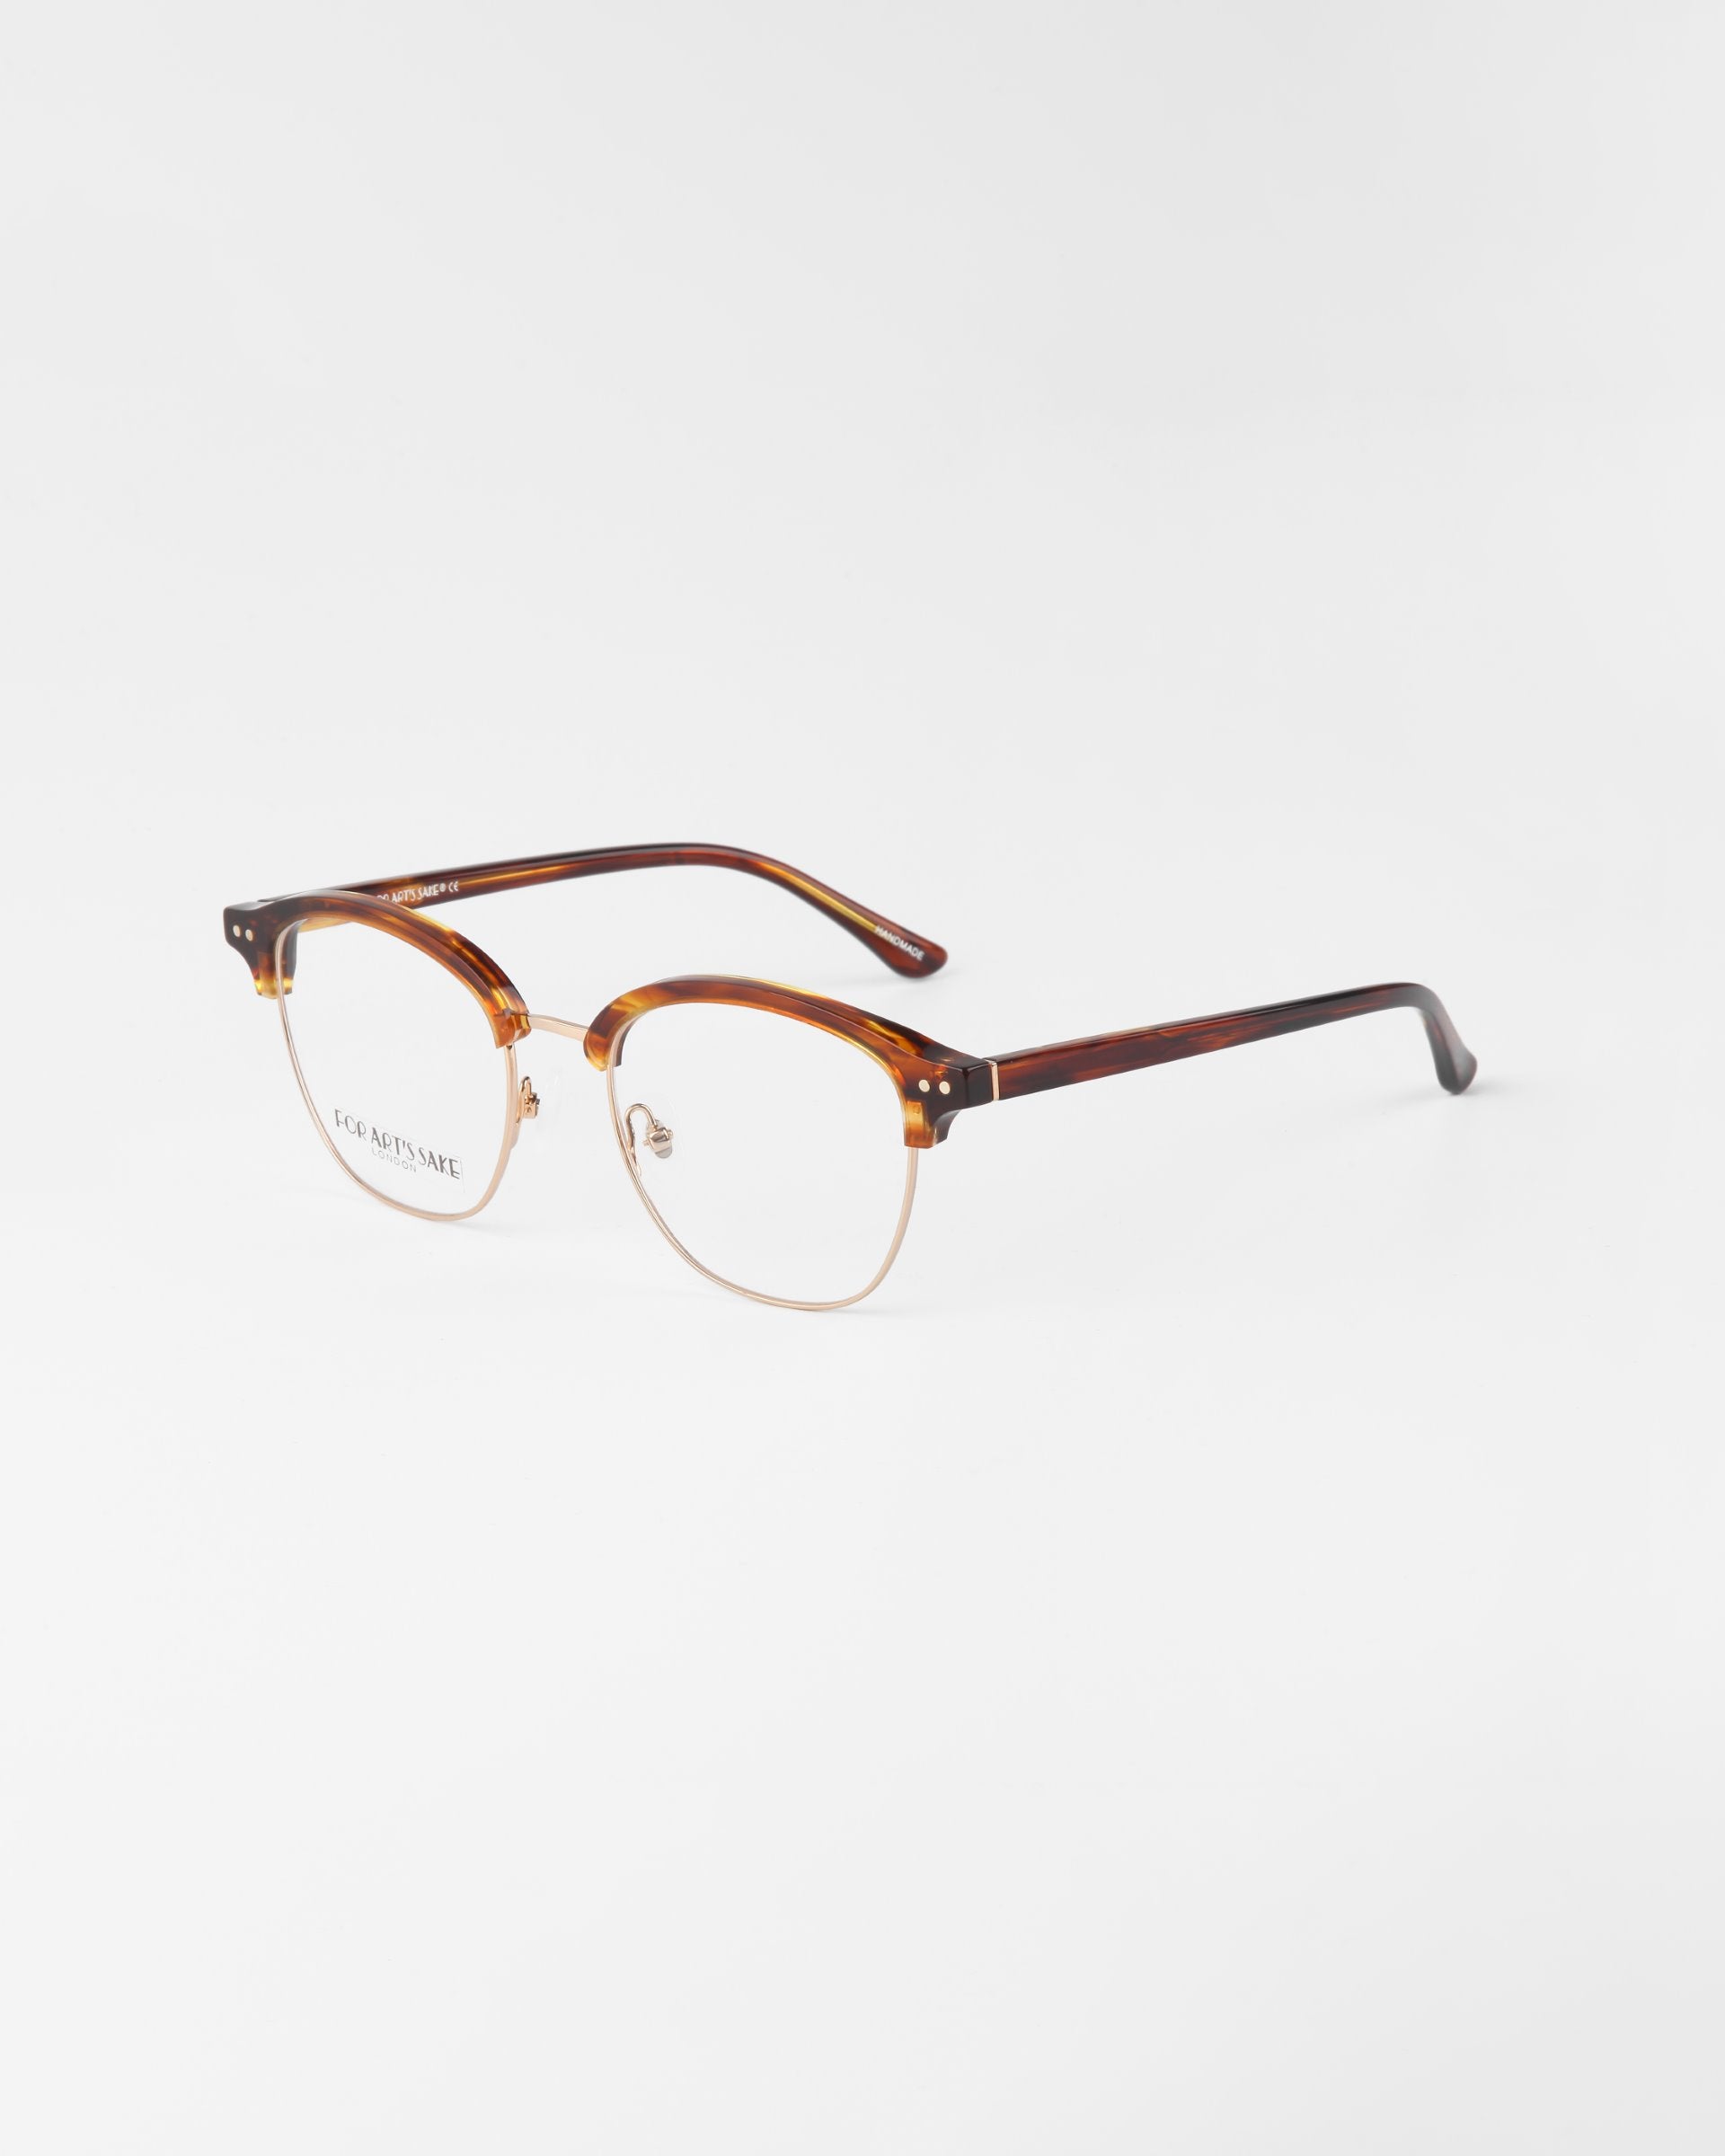 A pair of eyeglasses with a brown upper frame and metal lower rims. The frames have a sleek, modern design and temple arms that match the upper frame color. Featuring Blue Light Filter technology, these glasses are perfect for everyday screen use. The plain white background highlights the Painkiller by For Art&#39;s Sake® beautifully.